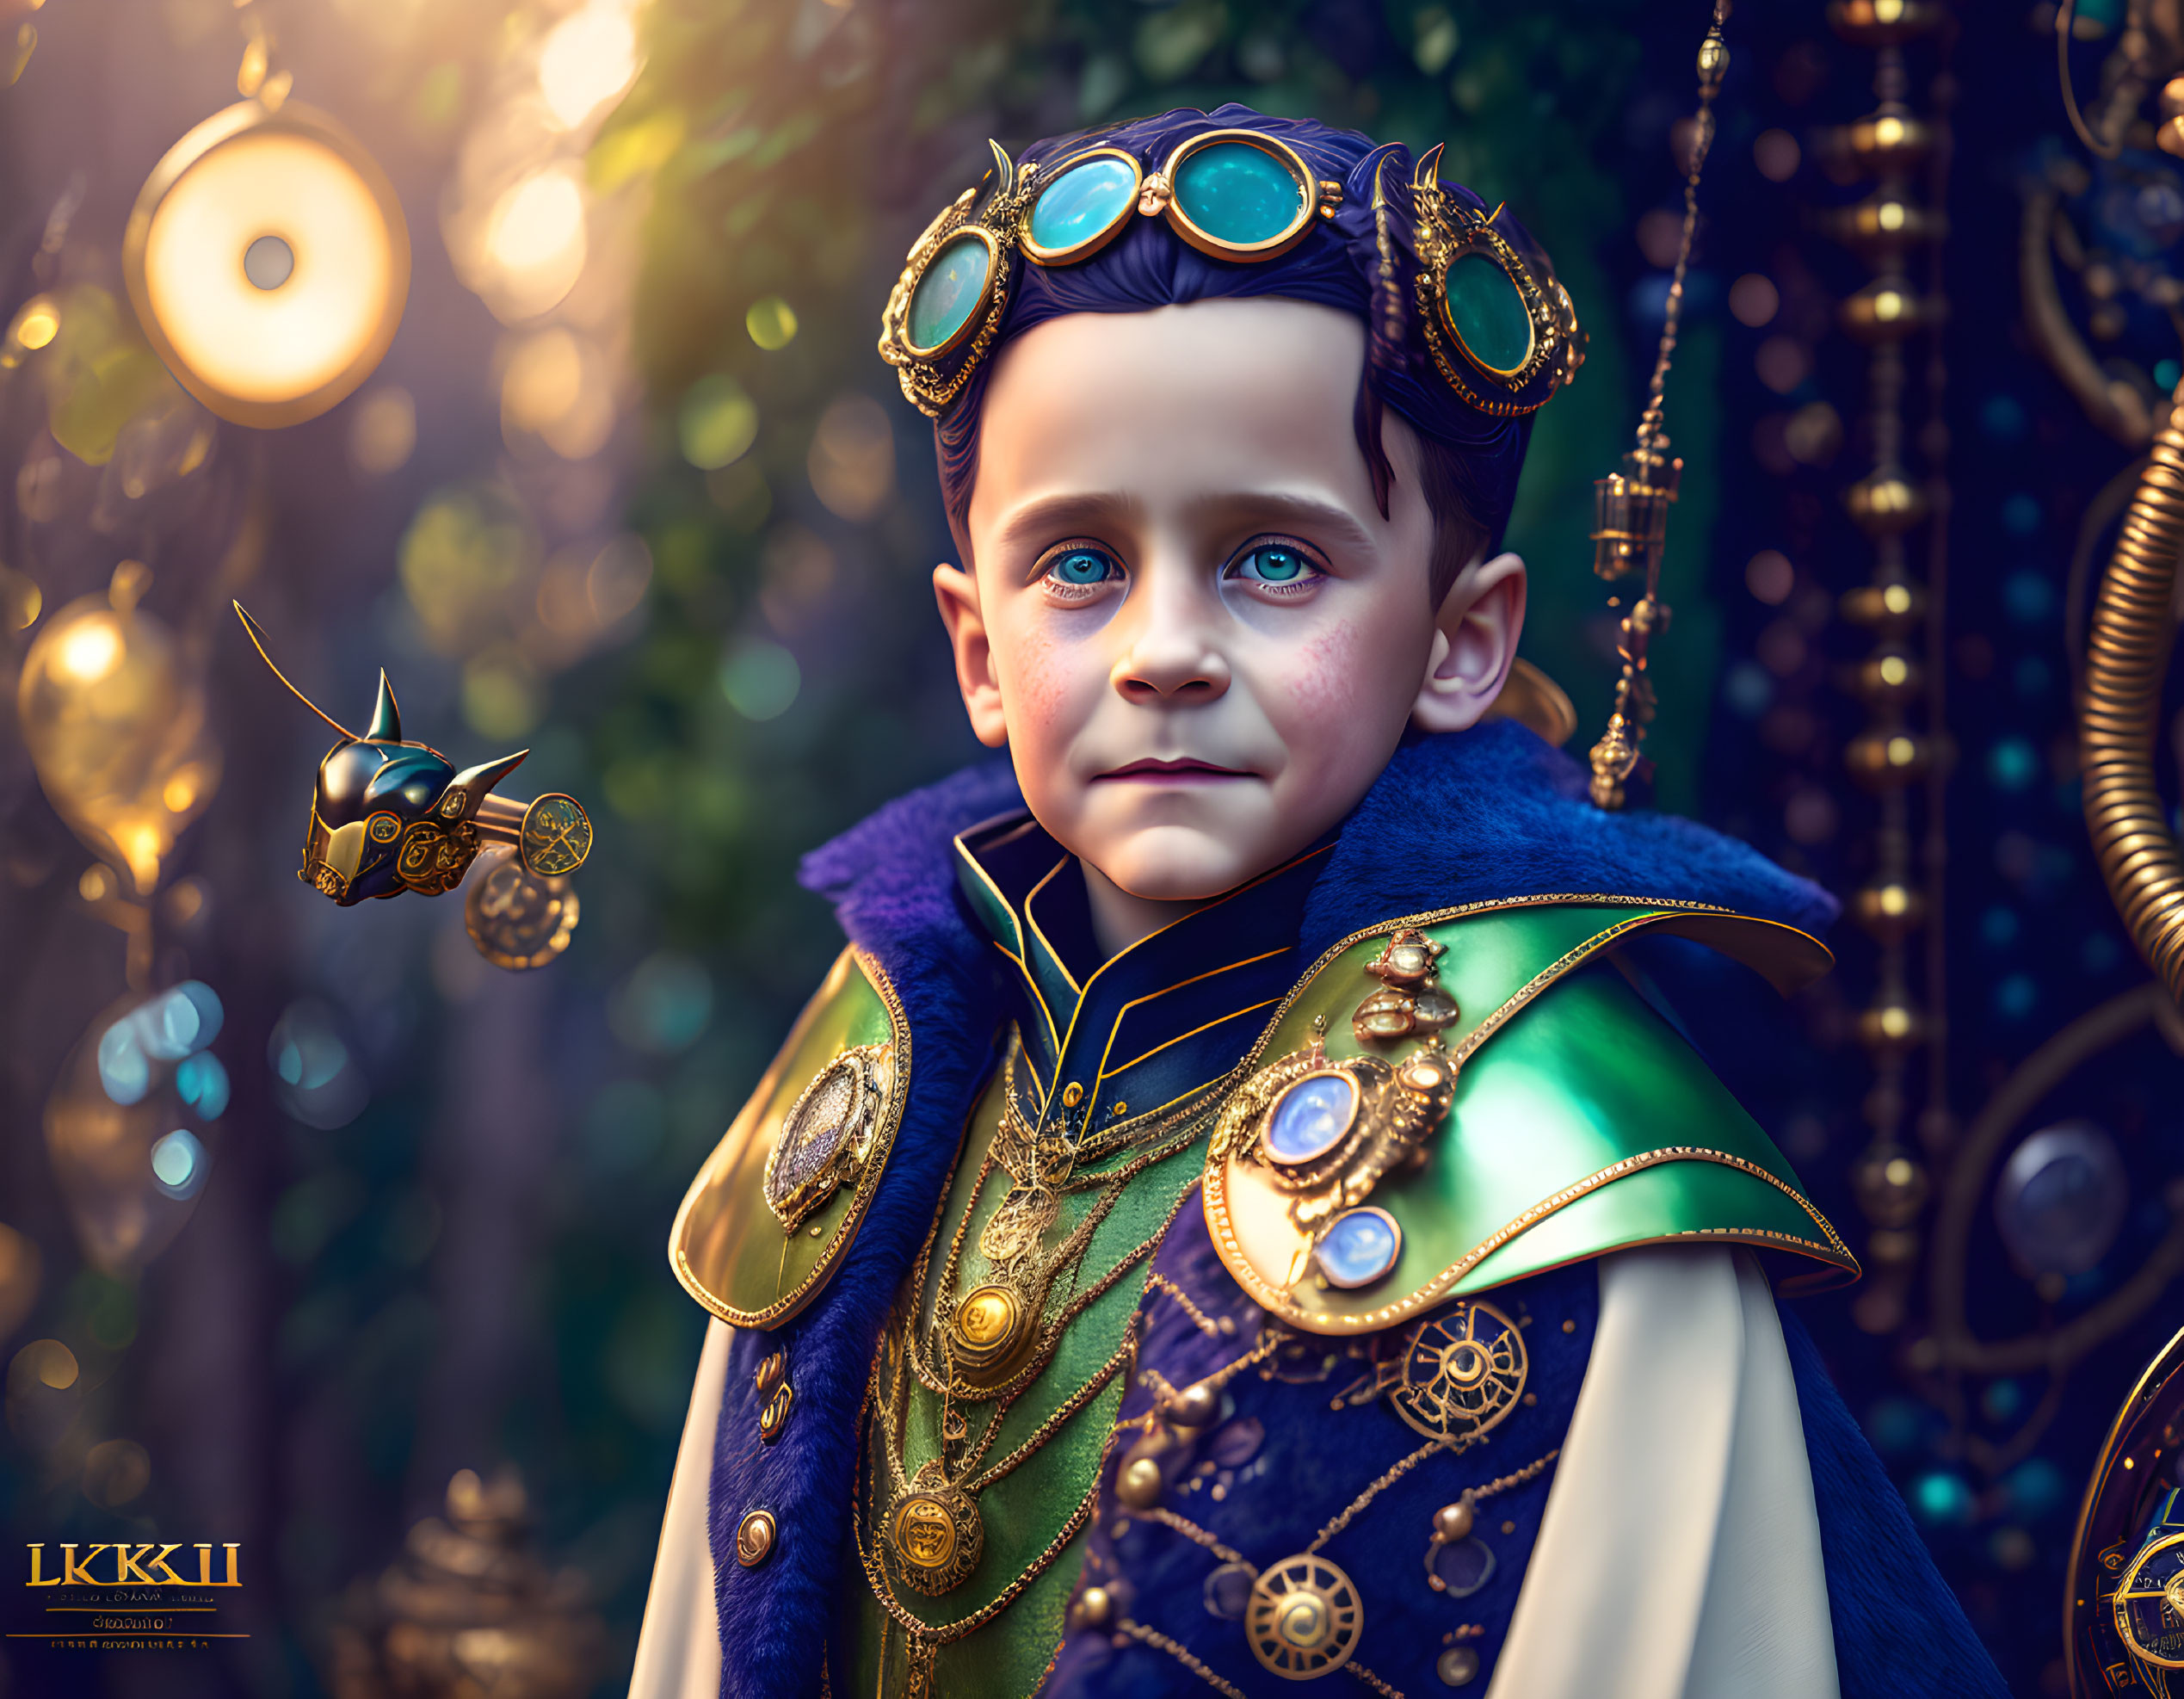 Young Boy in Royal Attire with Blue Eyes and Mechanical Bees